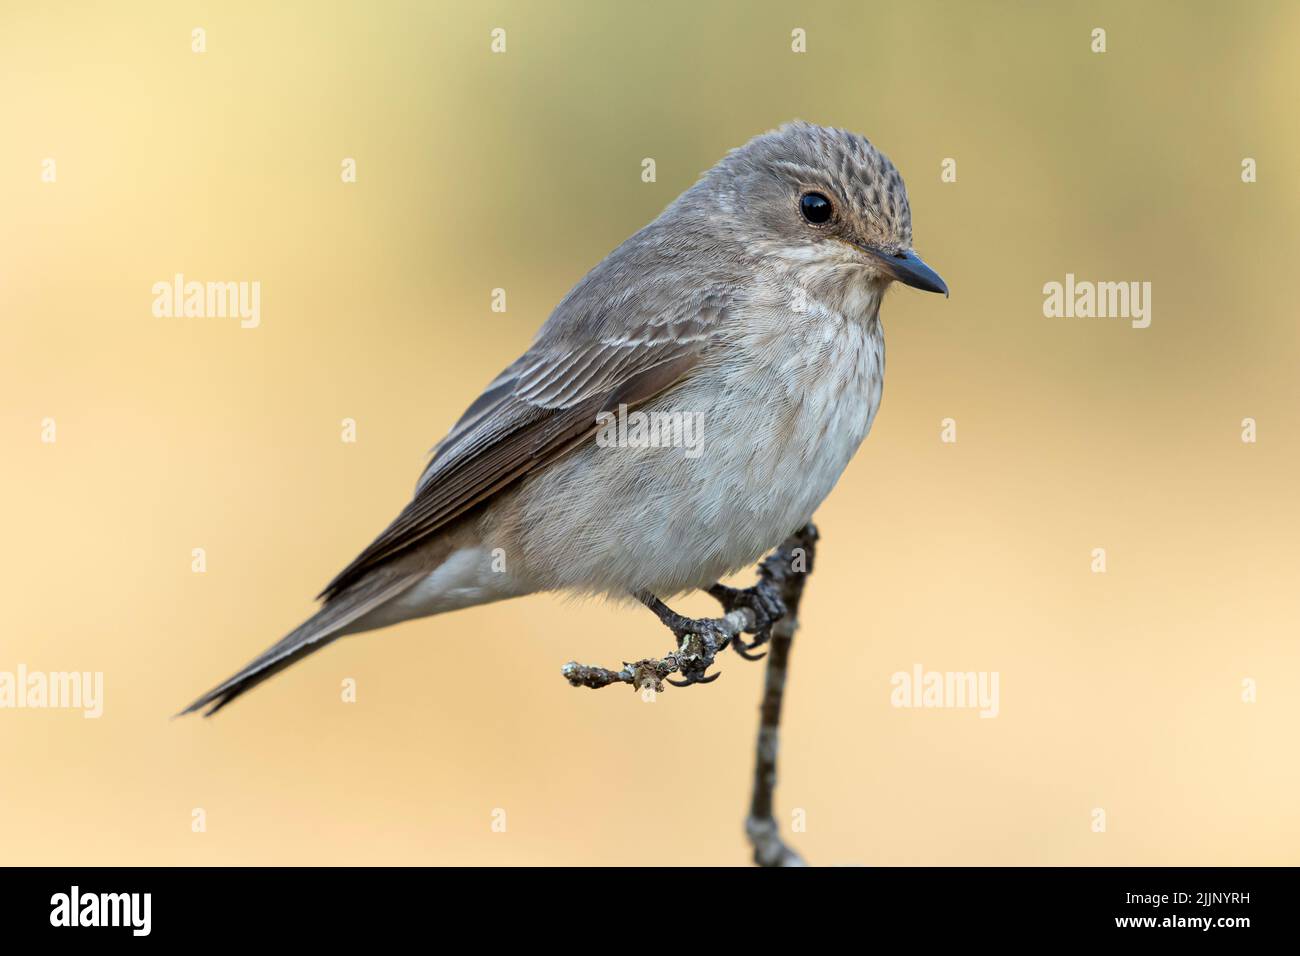 Spotted Flycatcher (Muscicapa striata) perched on a vertical thin branch in nature on a blurred ocher background Stock Photo